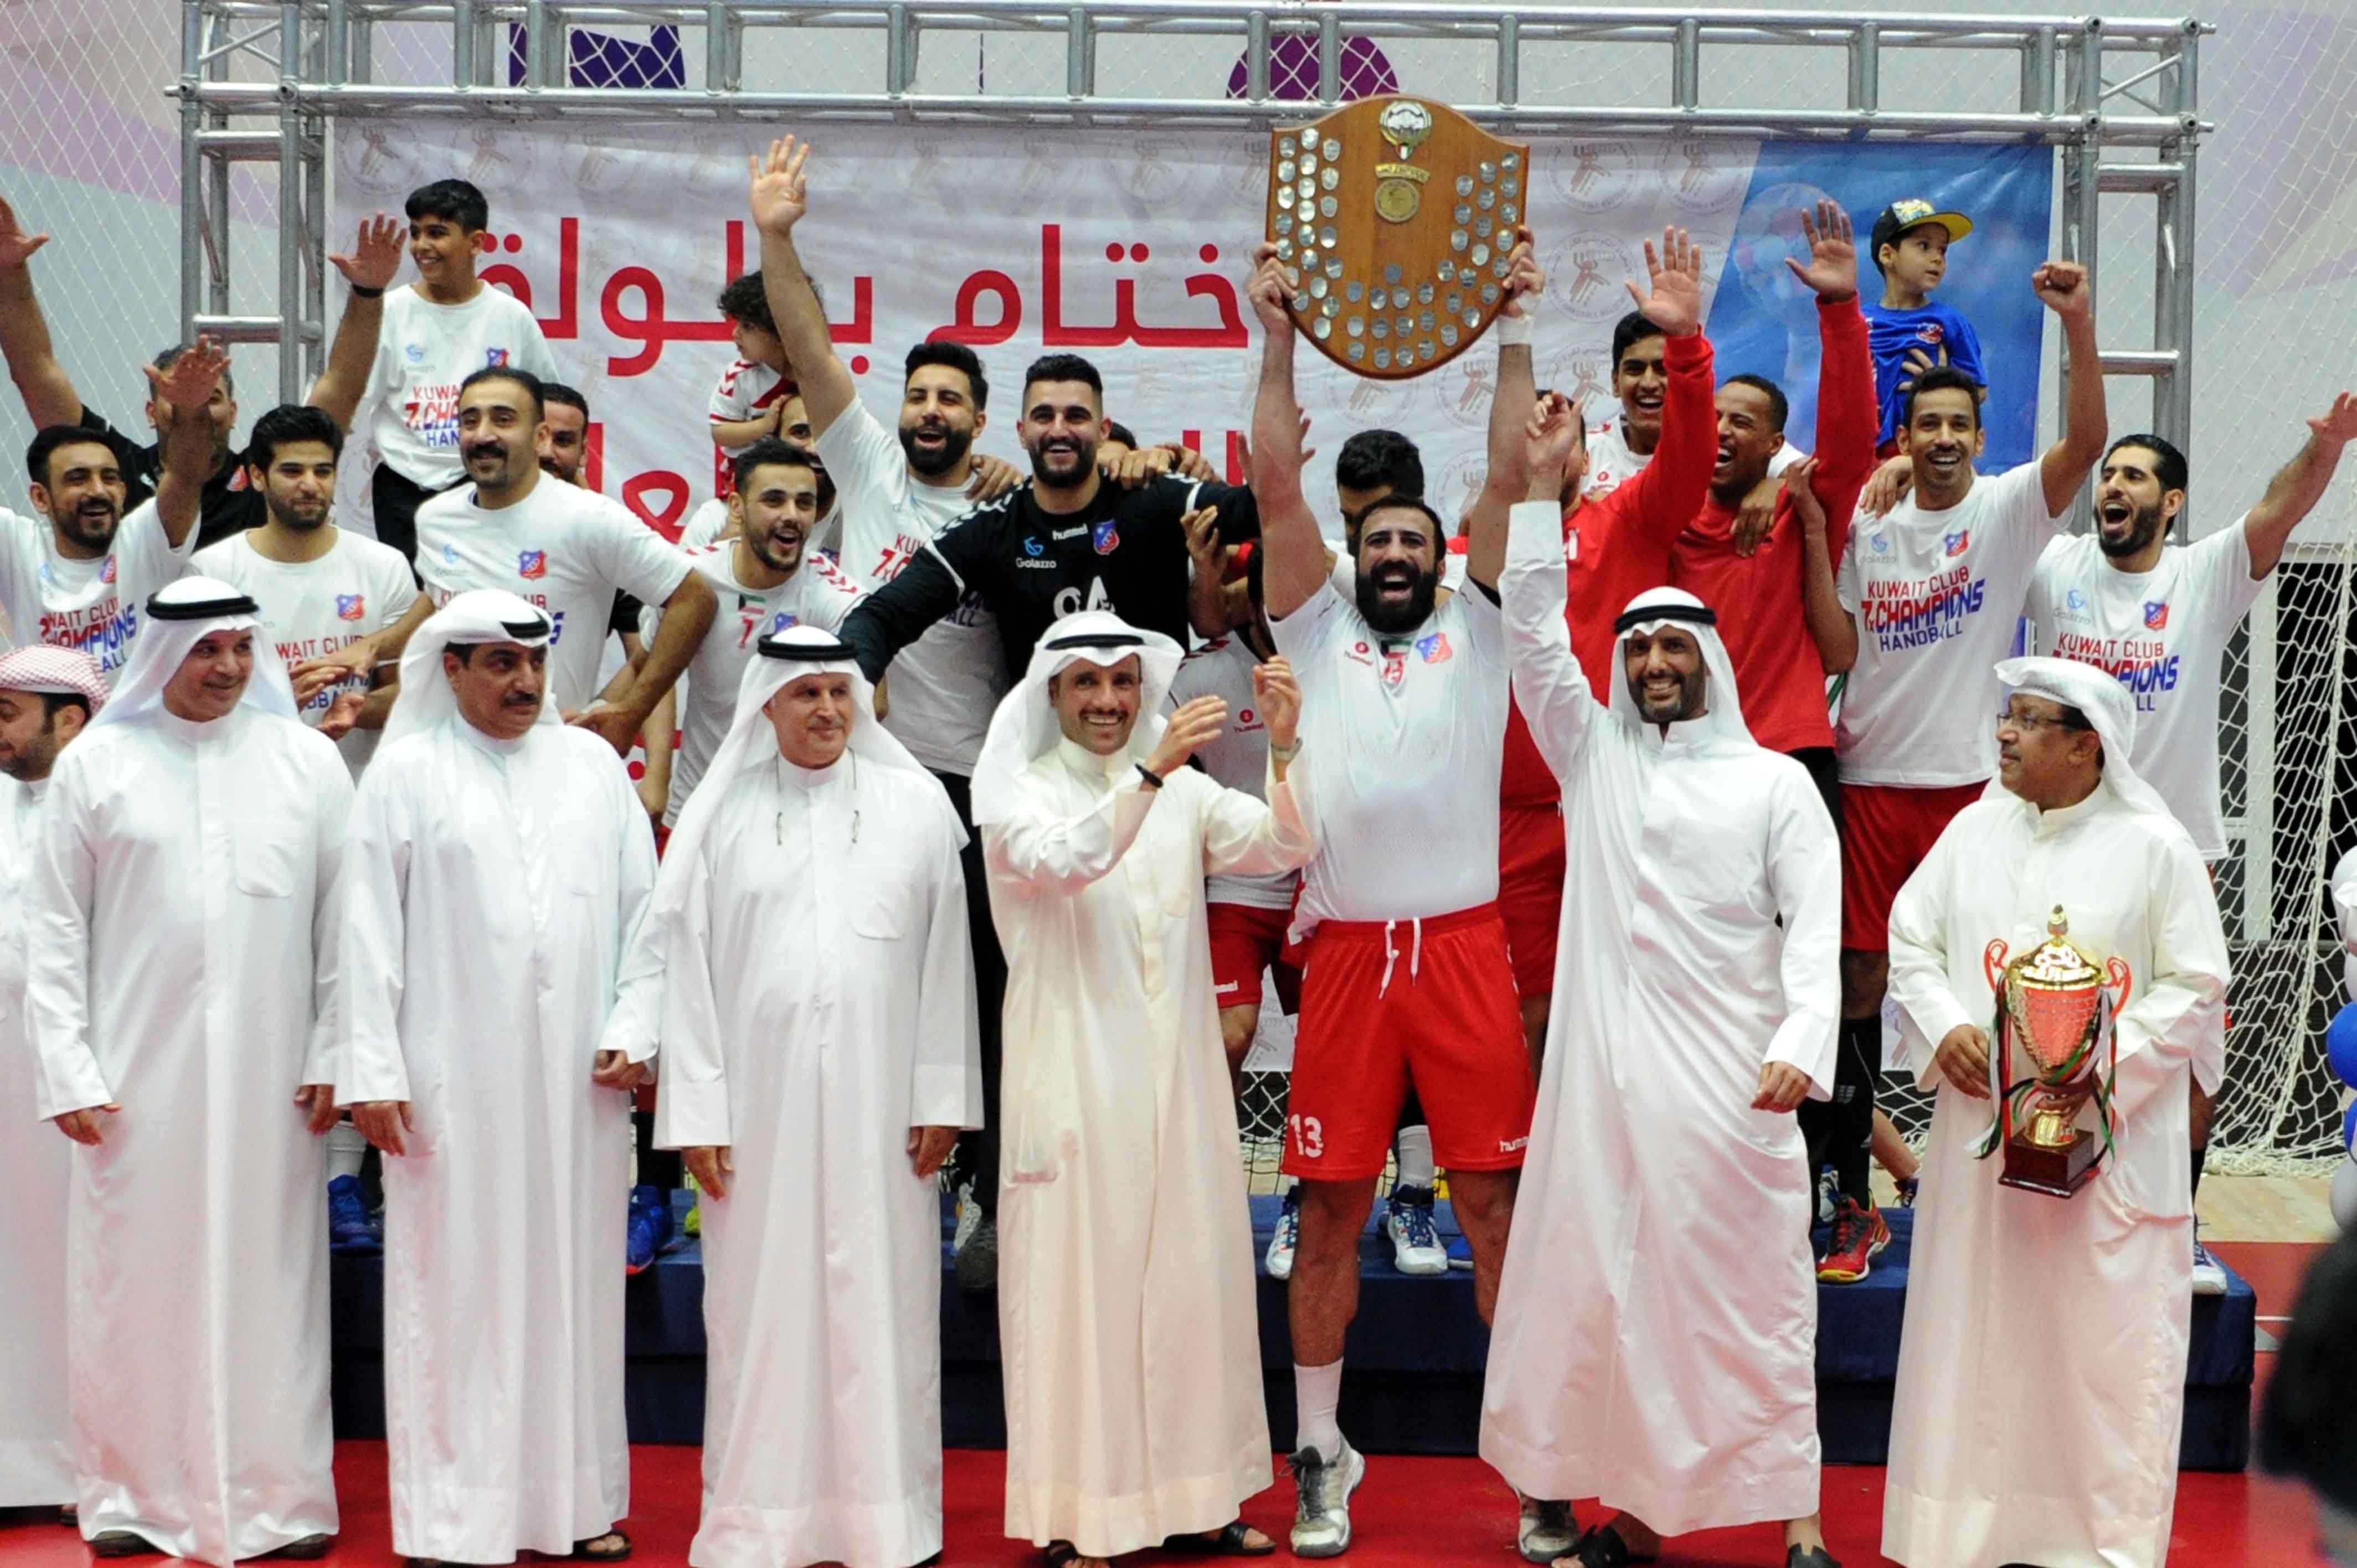 Kuwait SC handball team has been crowned champion of the local league competition for the sixth time in a row after beating Kazma 23-18